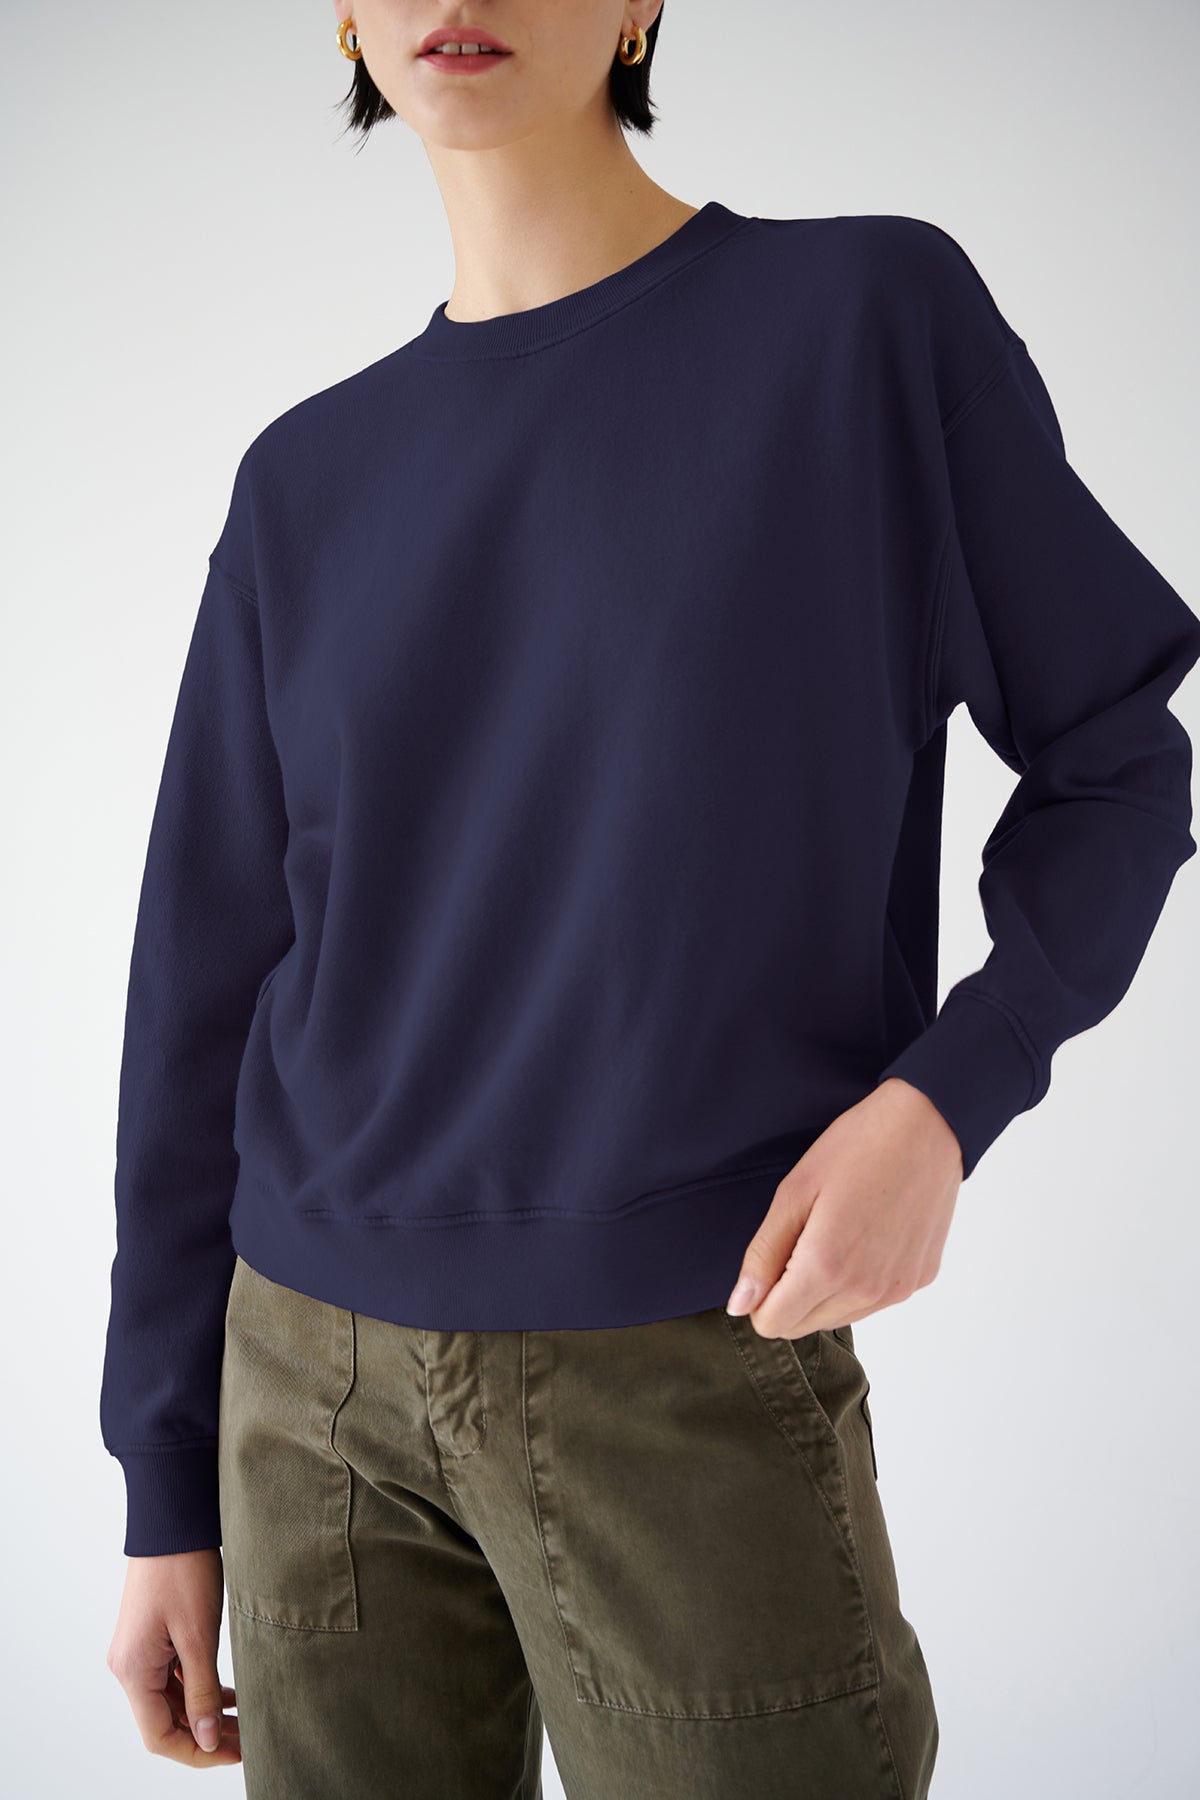 A woman in a dark blue Velvet by Jenny Graham YNEZ SWEATSHIRT made from organic cotton and olive green cargo pants against a light background. Only her torso is visible.-36891028291777